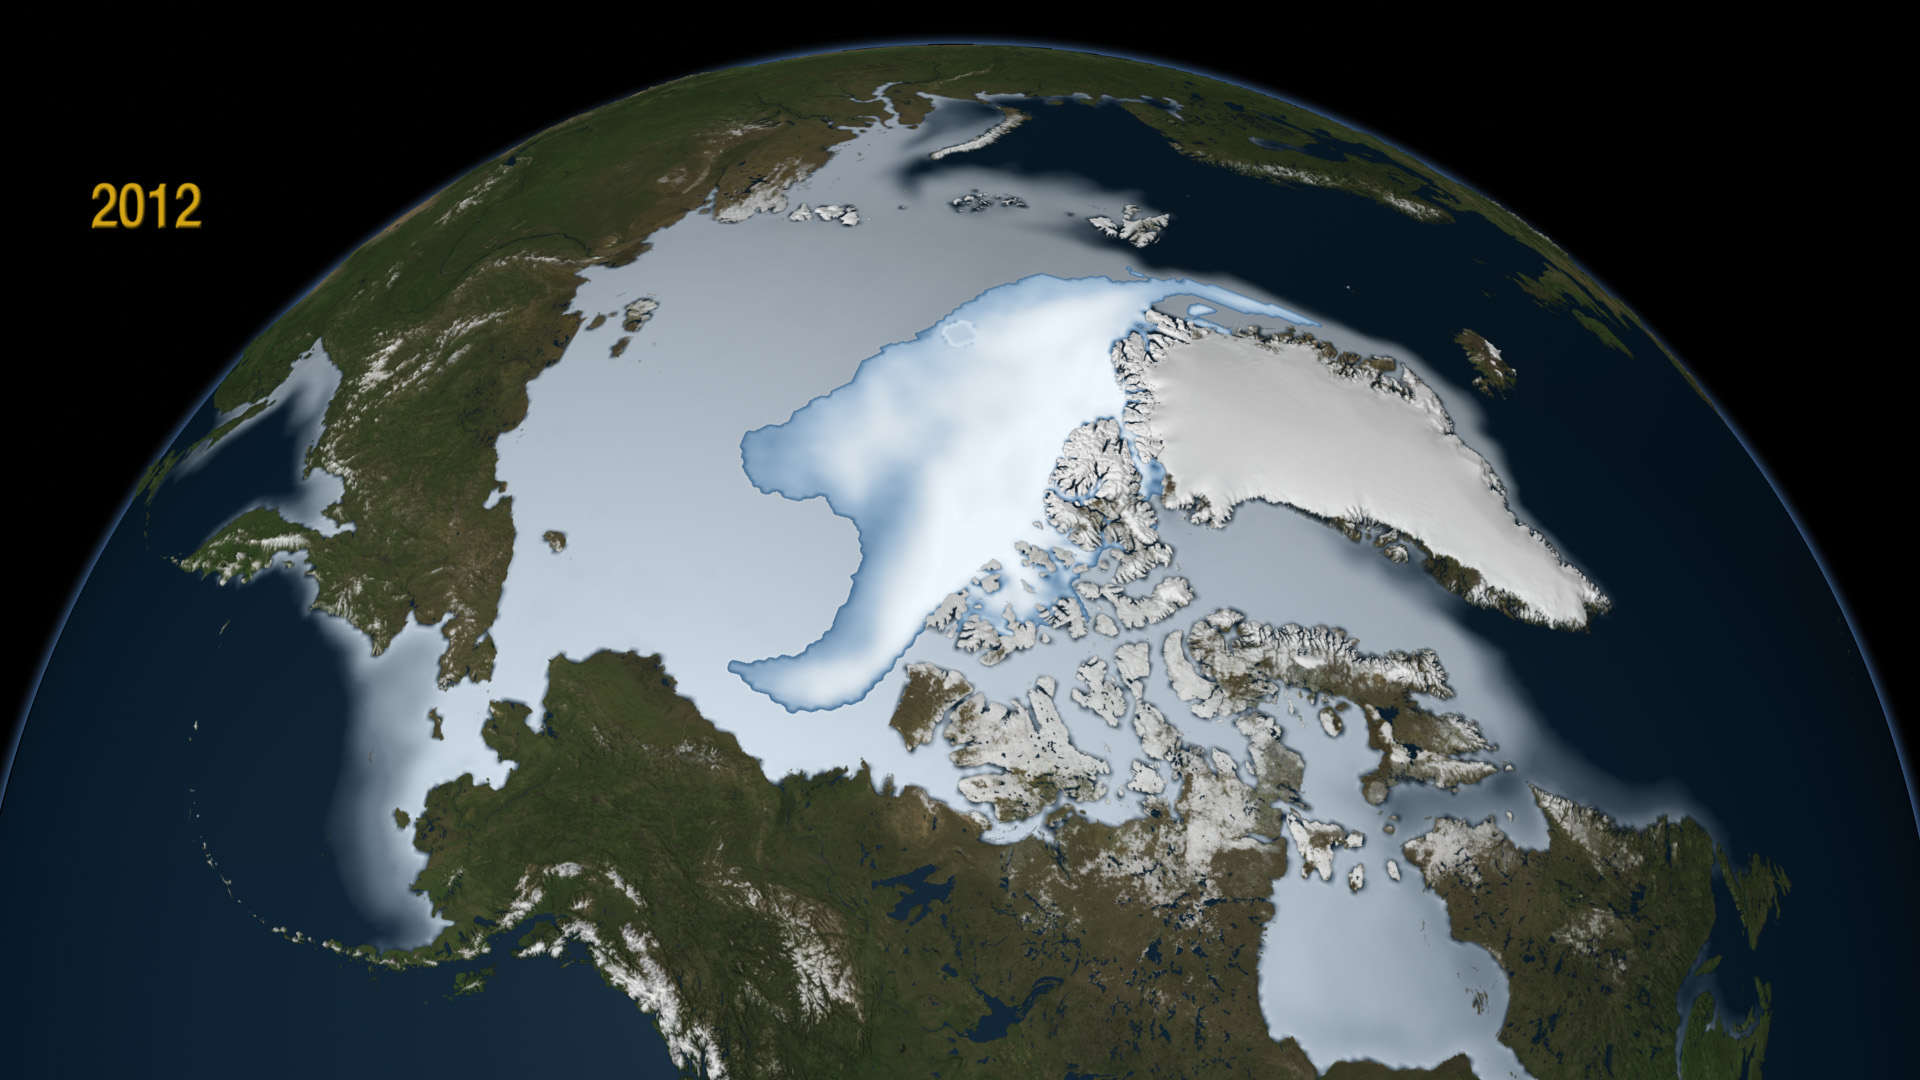 An image of multi-year sea ice (brighter white) shown over the average sea ice (light blue) during the three winter months ending in January 2012. This image has a transparent background.